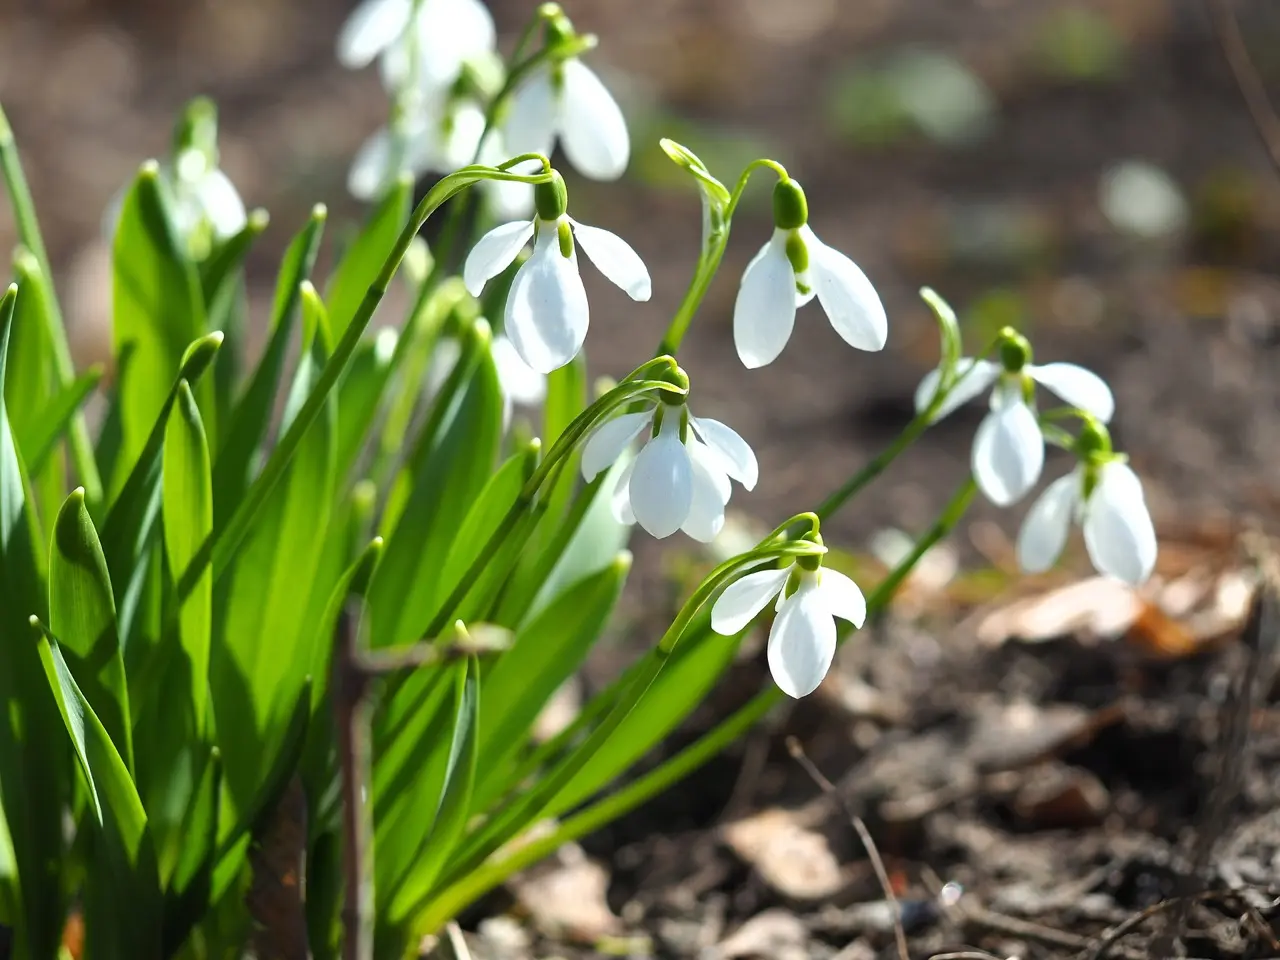 Group of snowdrop flowers in the ground